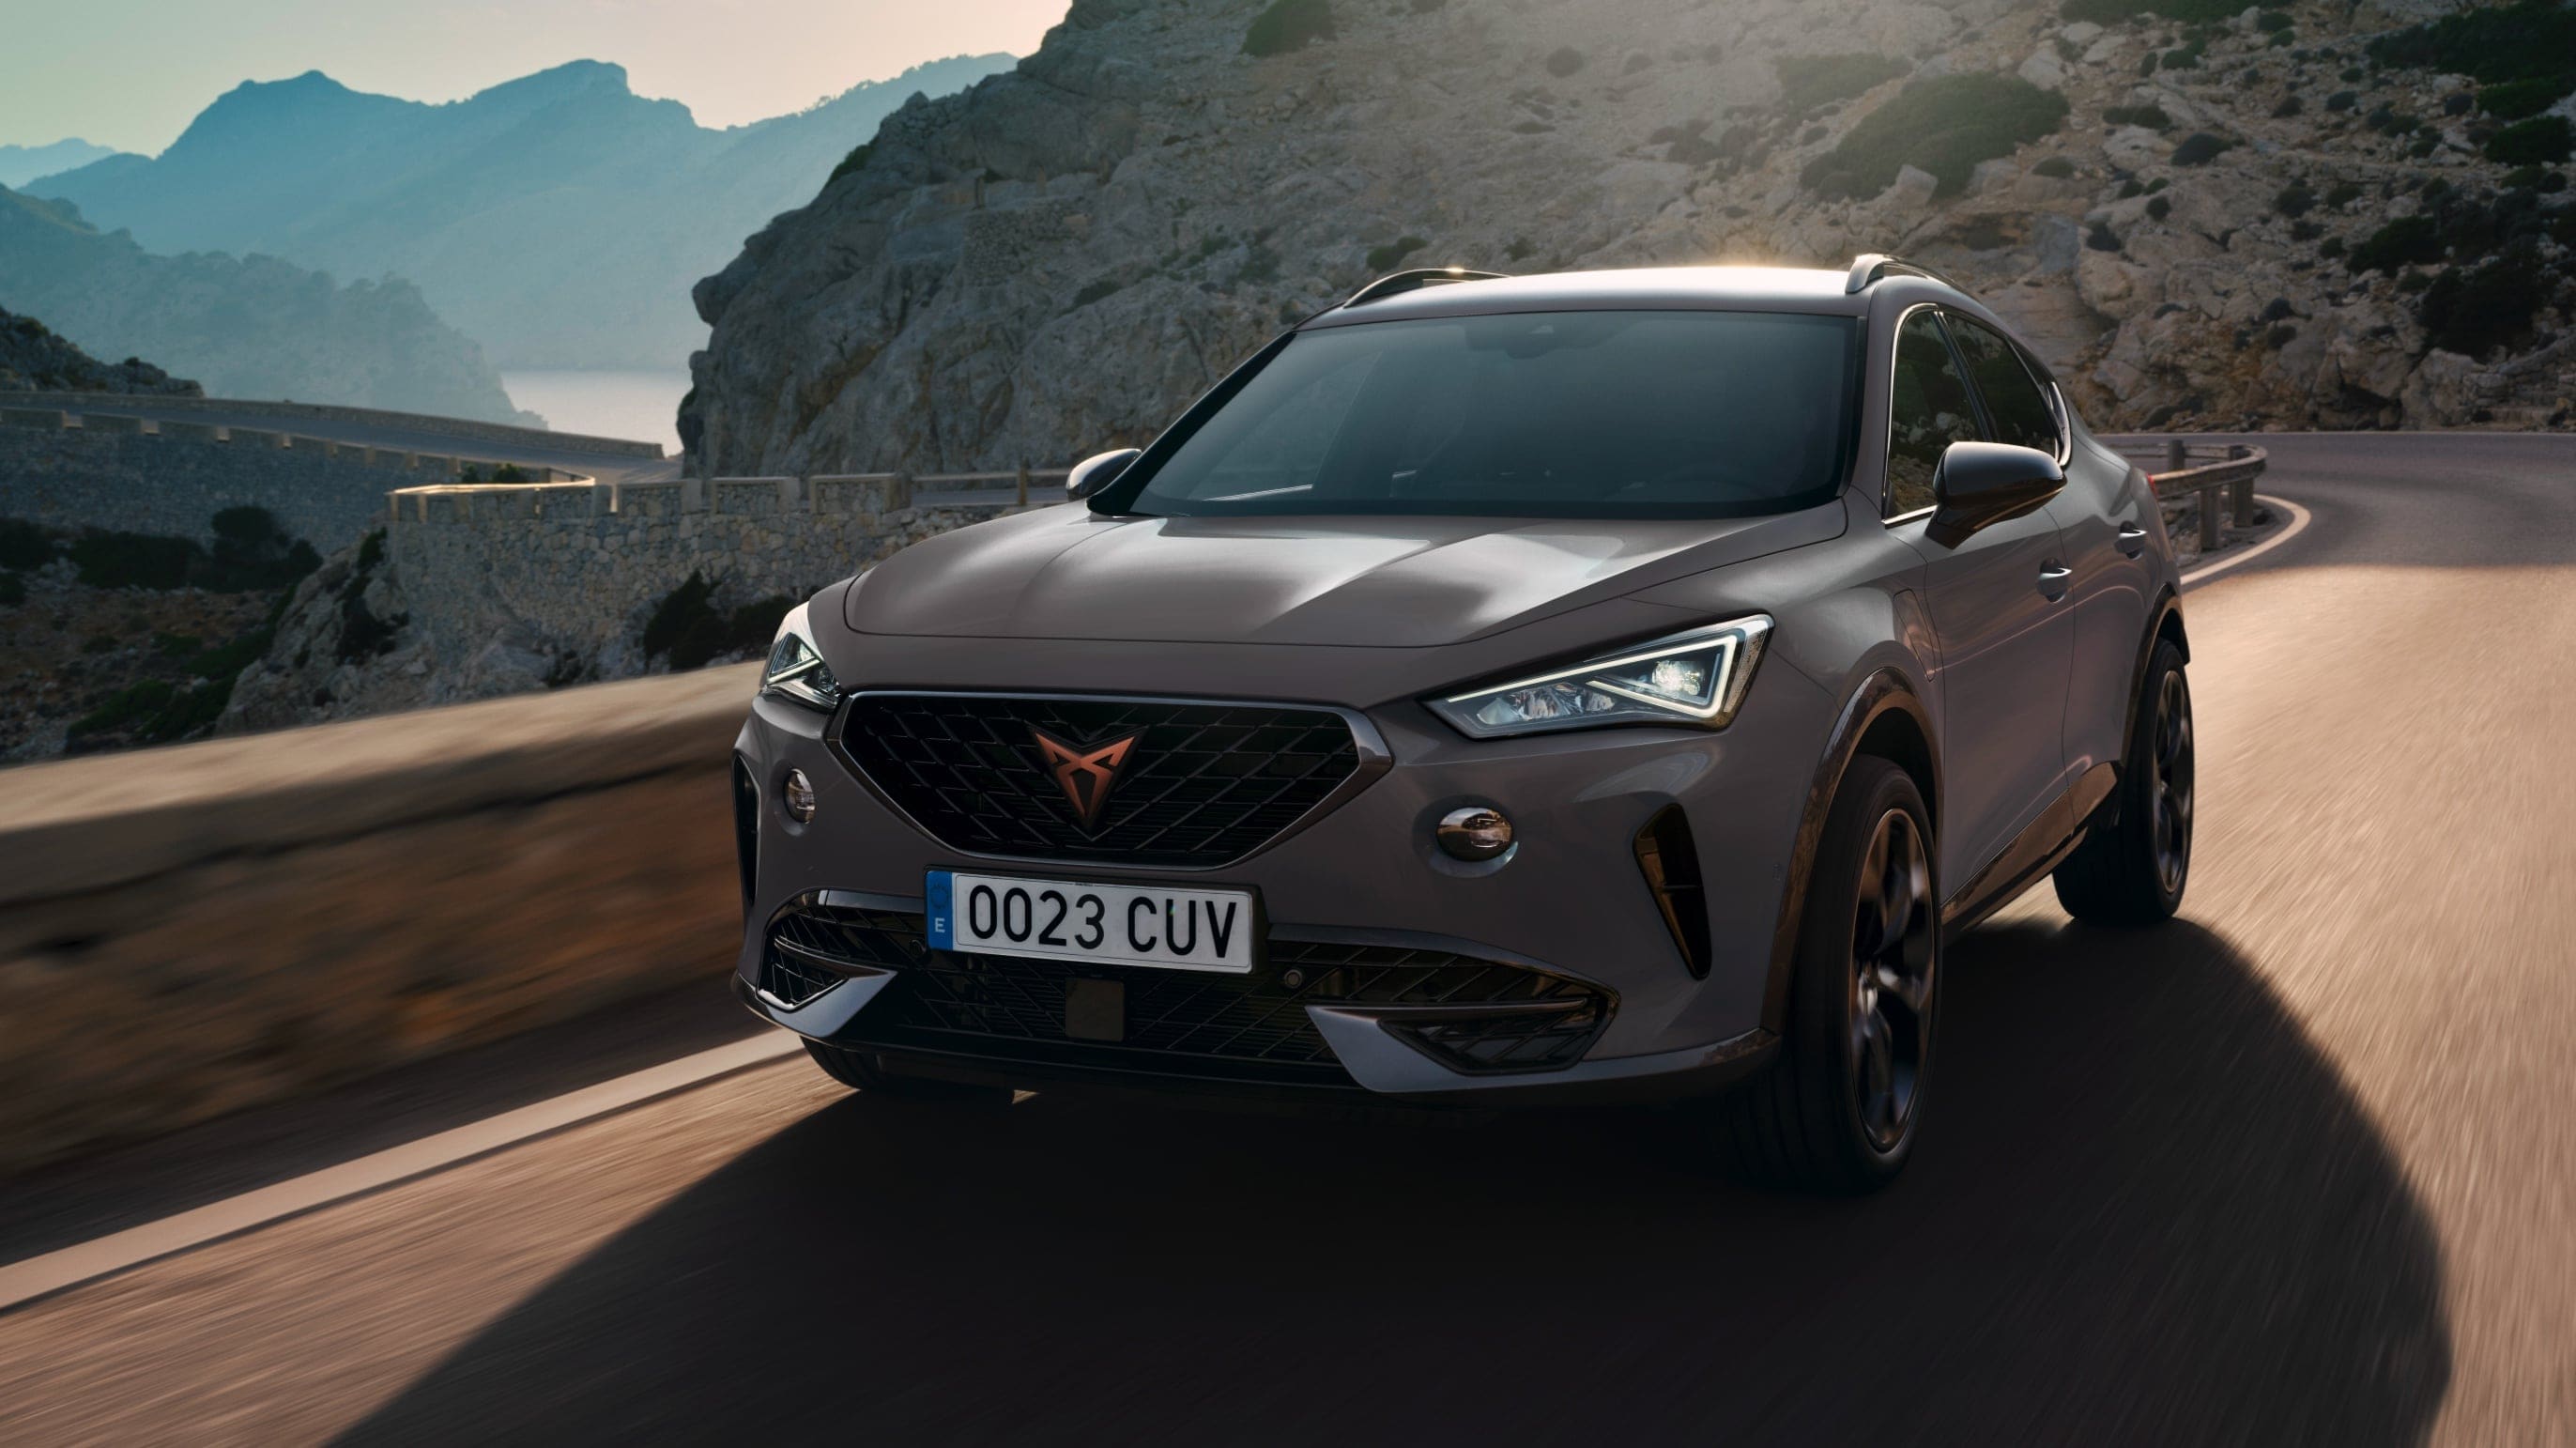 CUPRA Formentor: The first brand's concept-car is a hybrid CUV